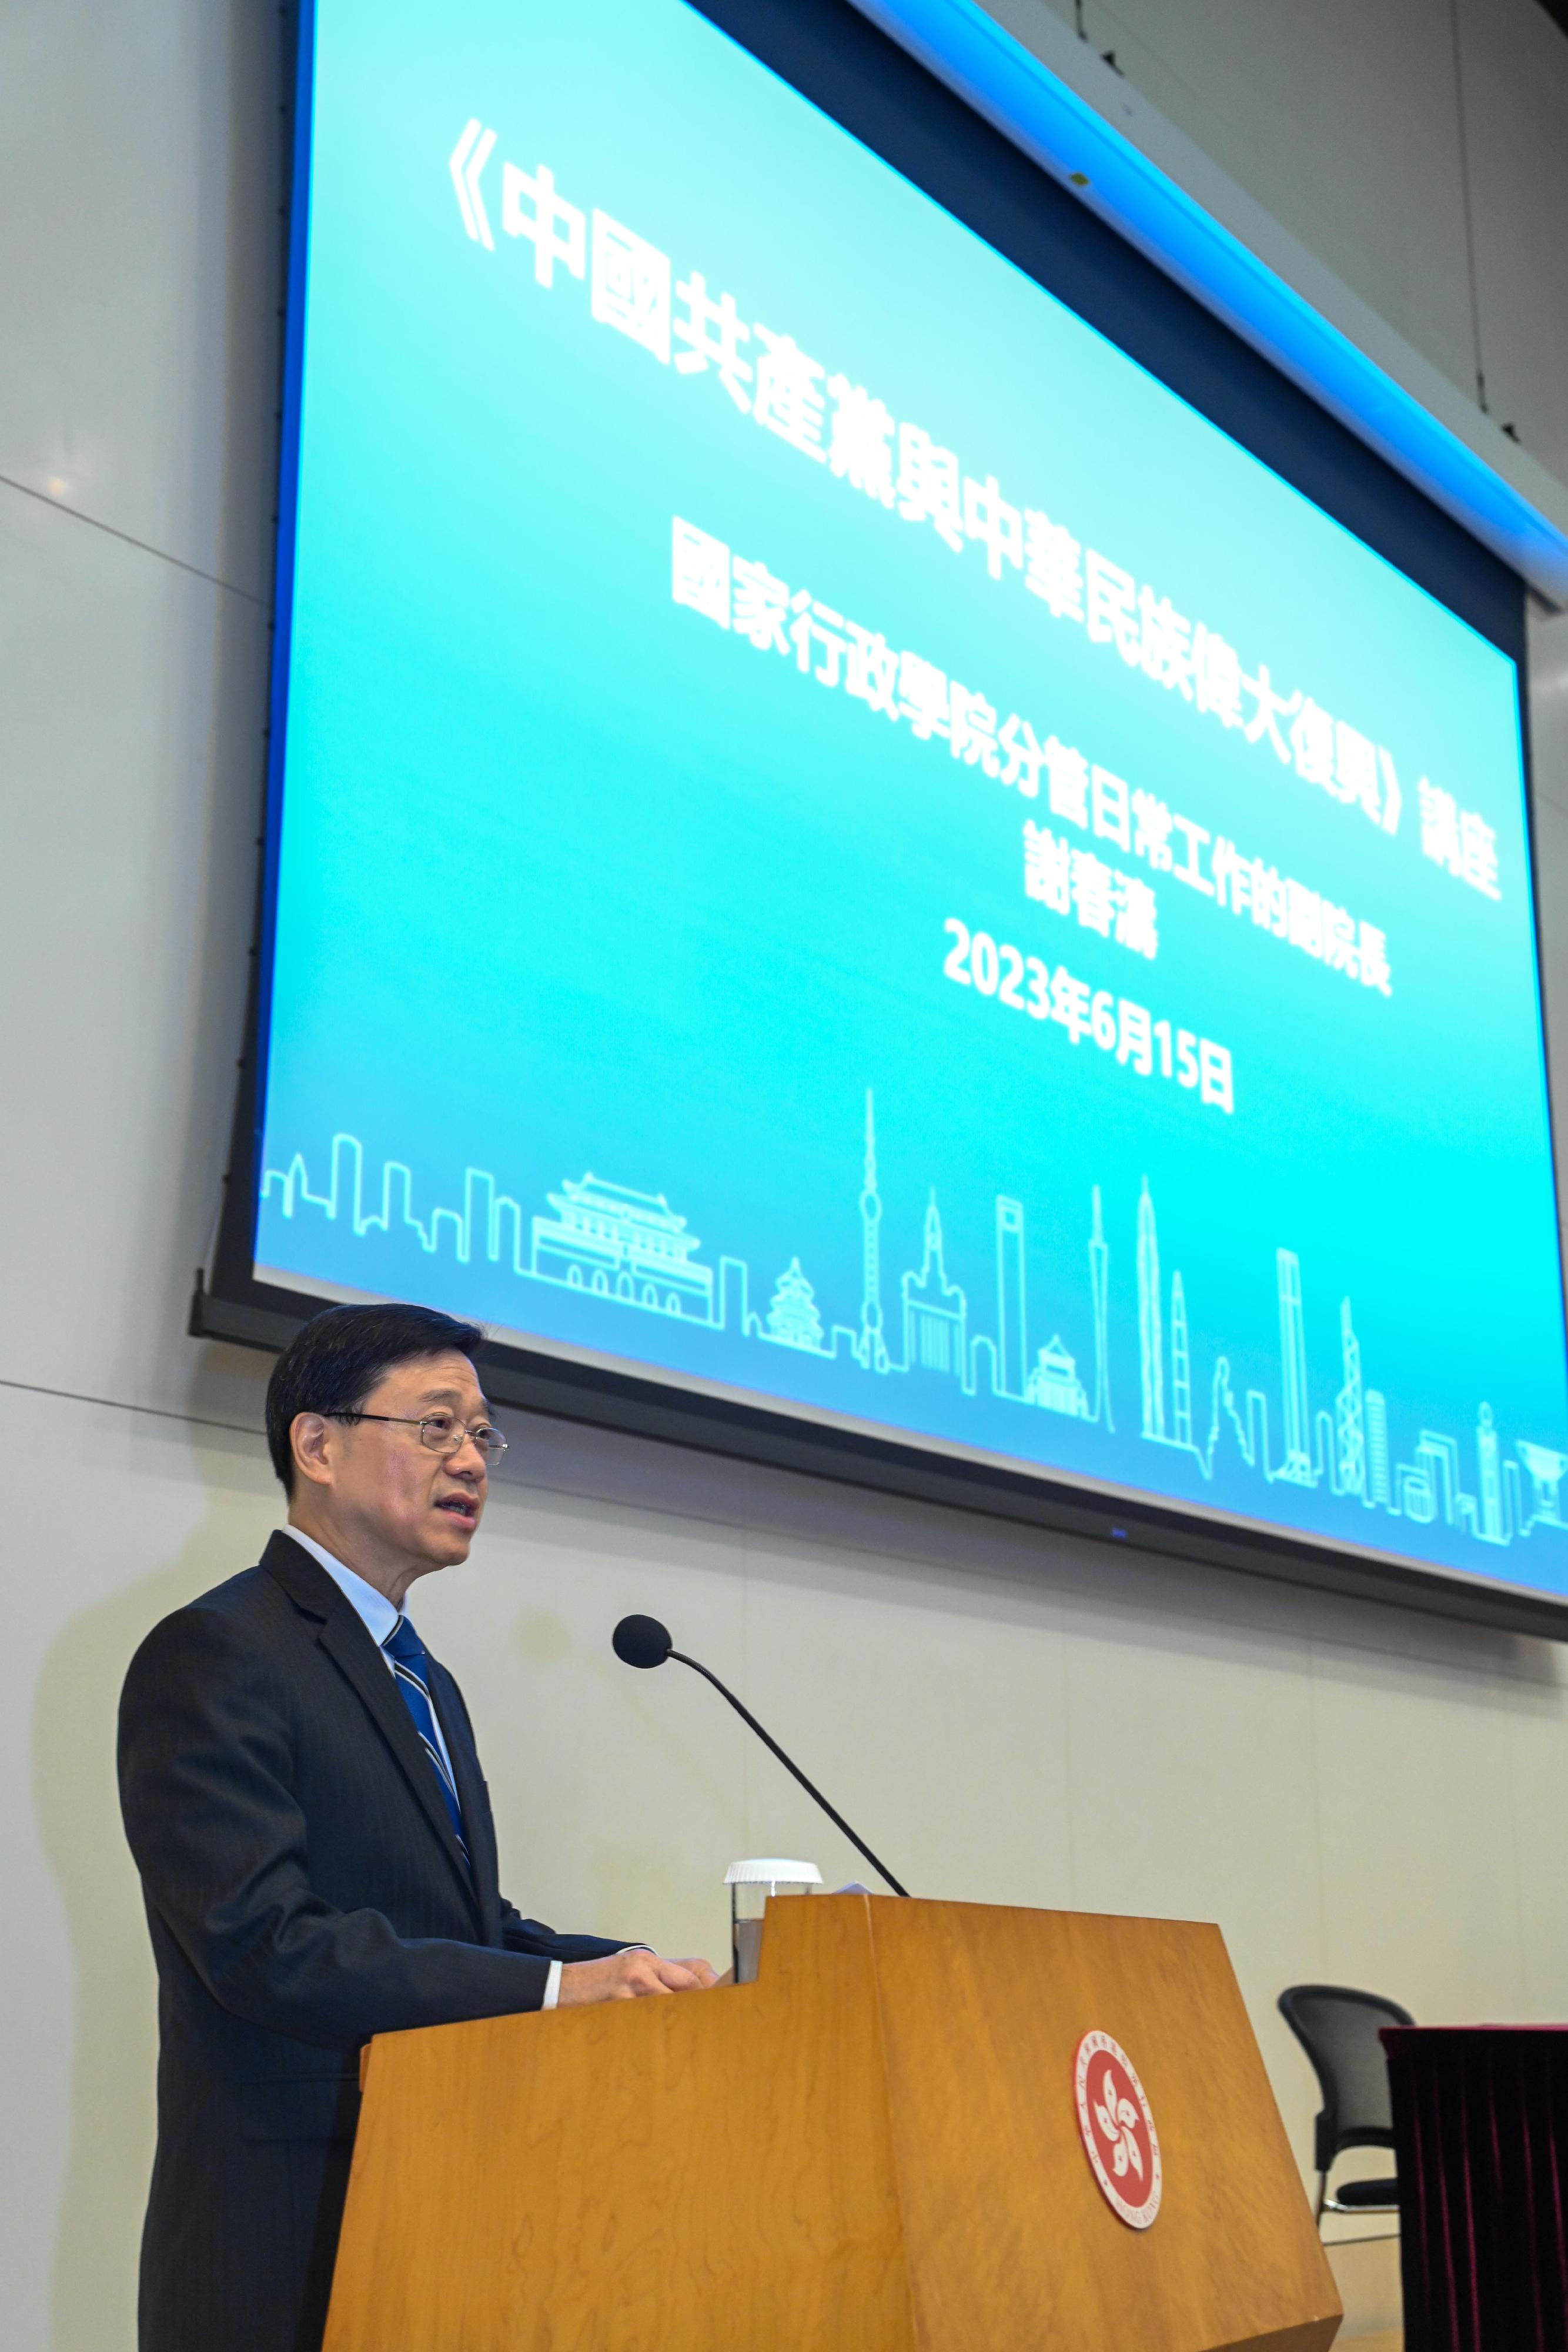 The Executive Vice President of the National Academy of Governance in charge of daily operations, Mr Xie Chuntao, was invited by the Civil Service Bureau to deliver a talk on "The Communist Party of China and the Great Rejuvenation of the Chinese Nation". The talk was attended by the Chief Executive, Mr John Lee, and around 350 senior officials, including Secretaries of Departments, Directors of Bureaux and other politically appointed officials, as well as Permanent Secretaries, Heads of Departments, and other senior directorate officers of the Hong Kong Special Administrative Region Government. Photo shows Mr Lee delivering a speech.